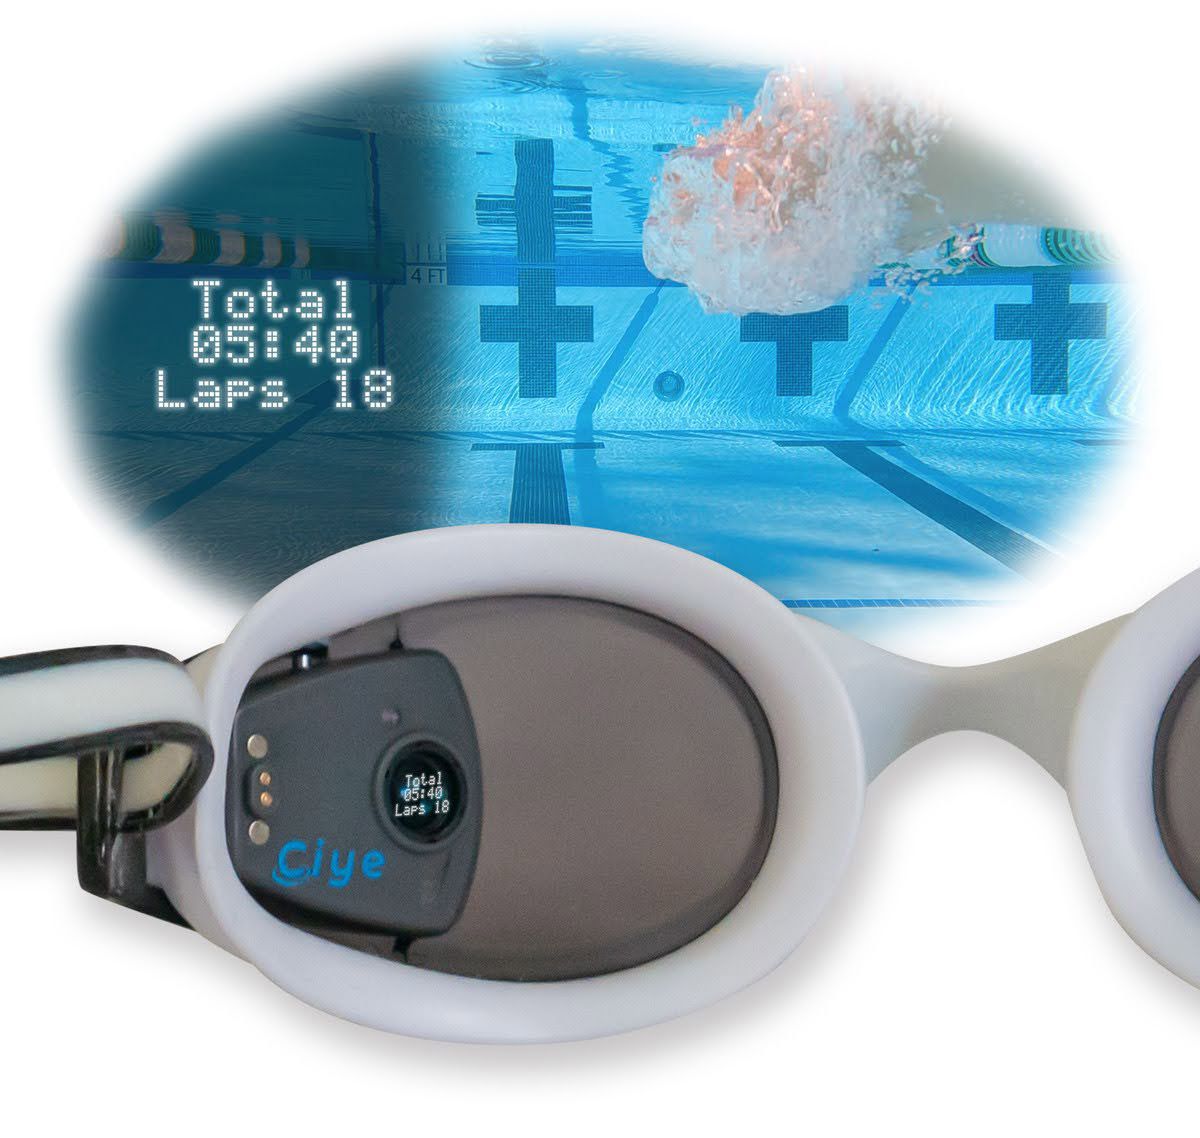 Close-up of the left lens of a Smart Goggle showing the small Ciye module. An overlay shows what the swimmer would see while wearing the goggles, with the laps displayed in the swimmer’s left view.